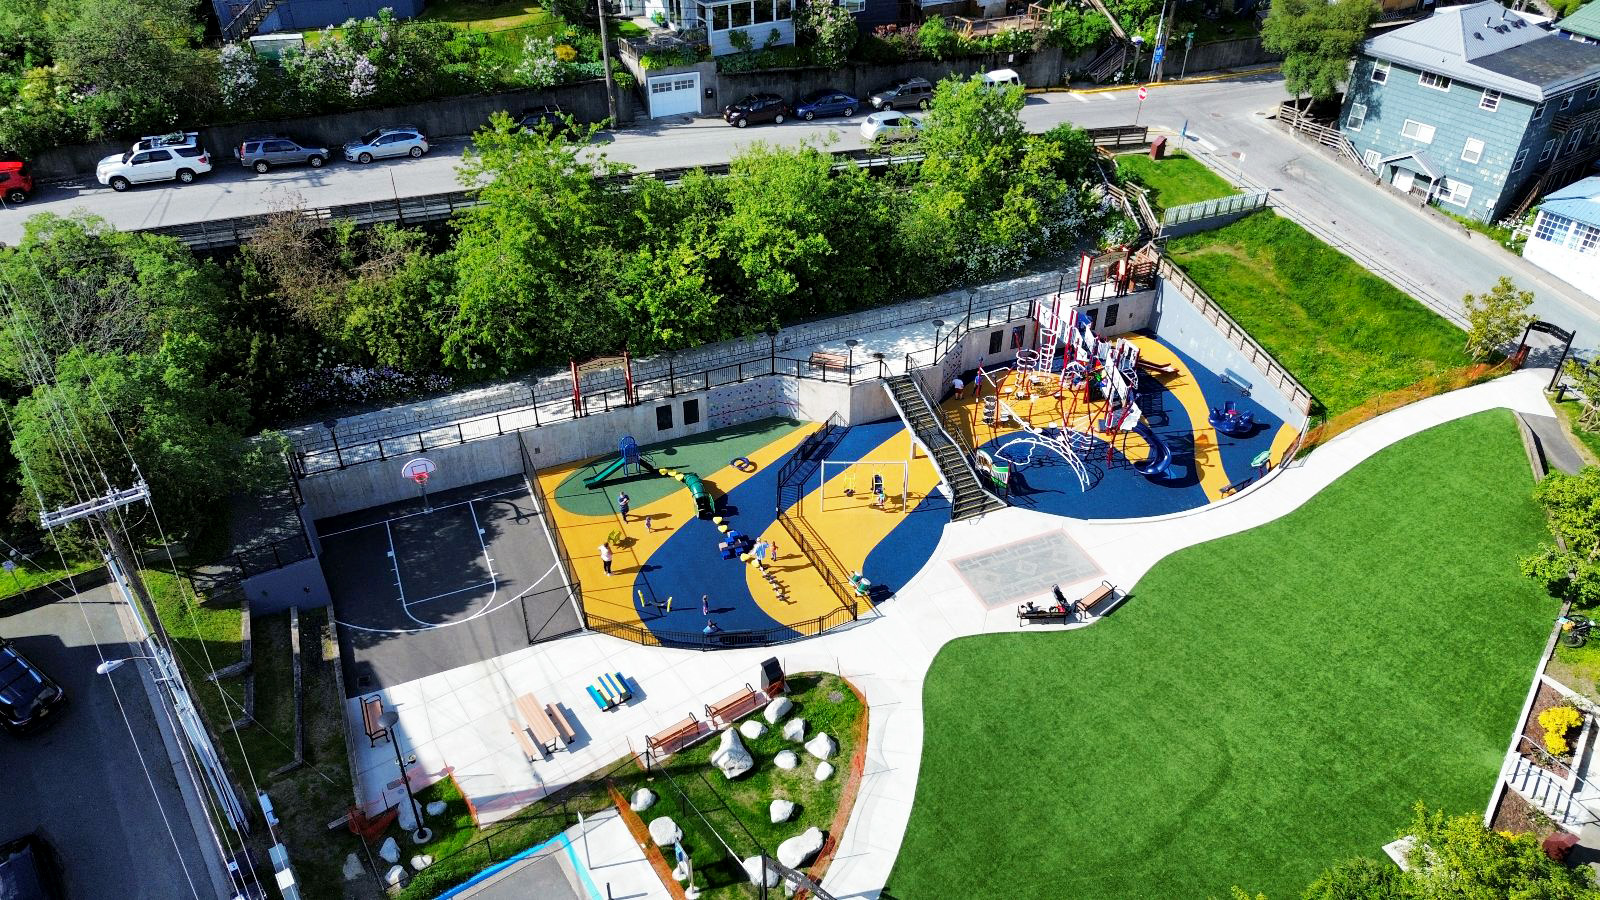 Featured image for “Capital School Park Reconstruction”